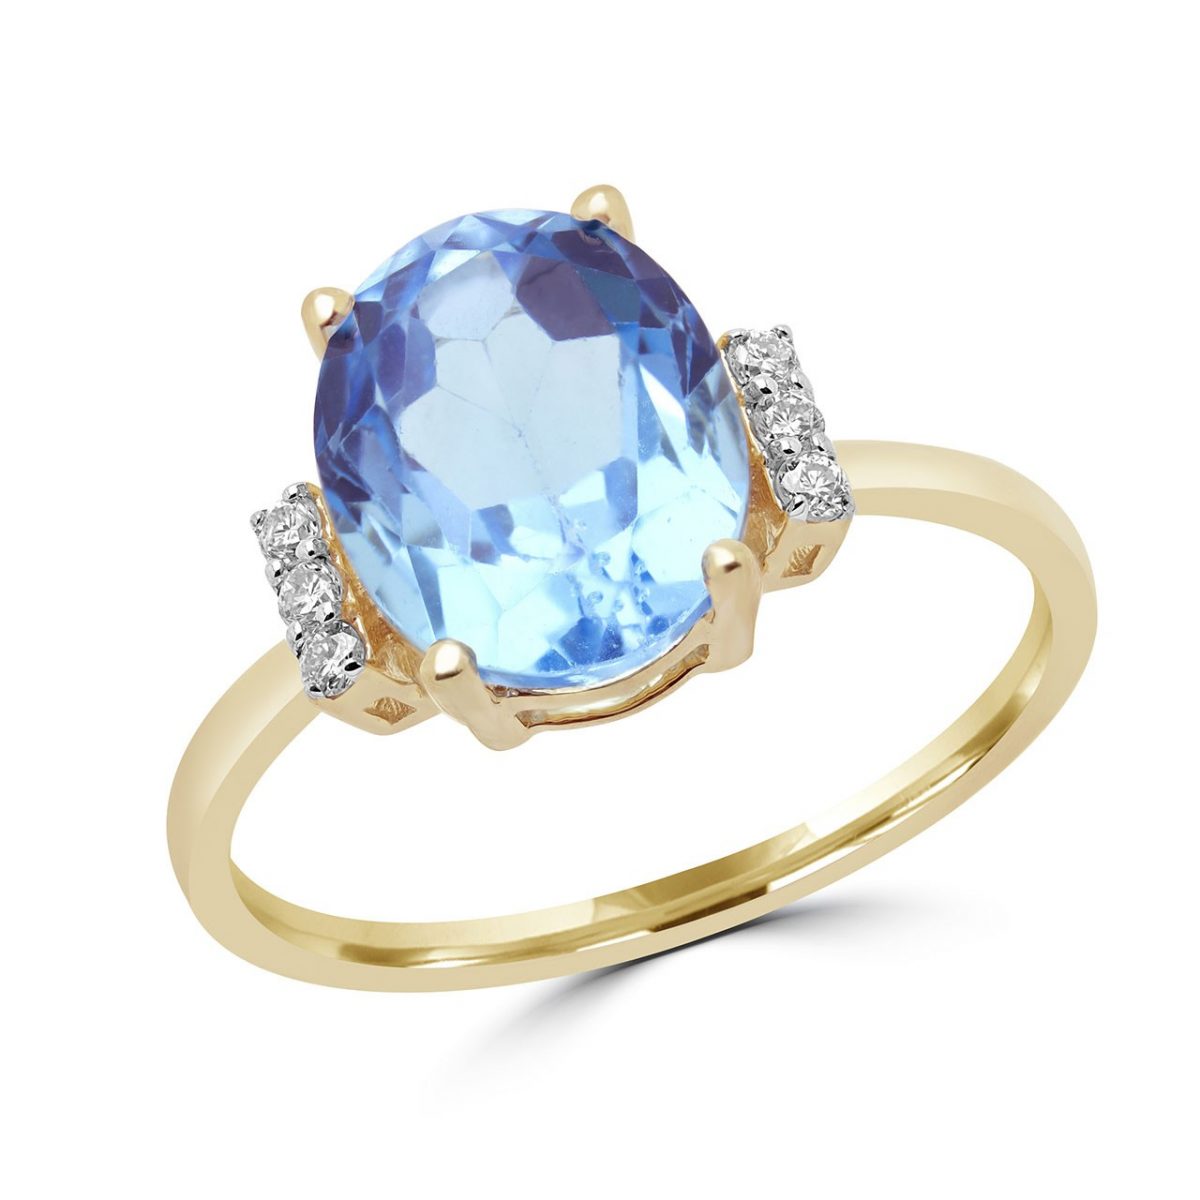 Blue topaz & diamond cocktail ring in 14k yellow gold